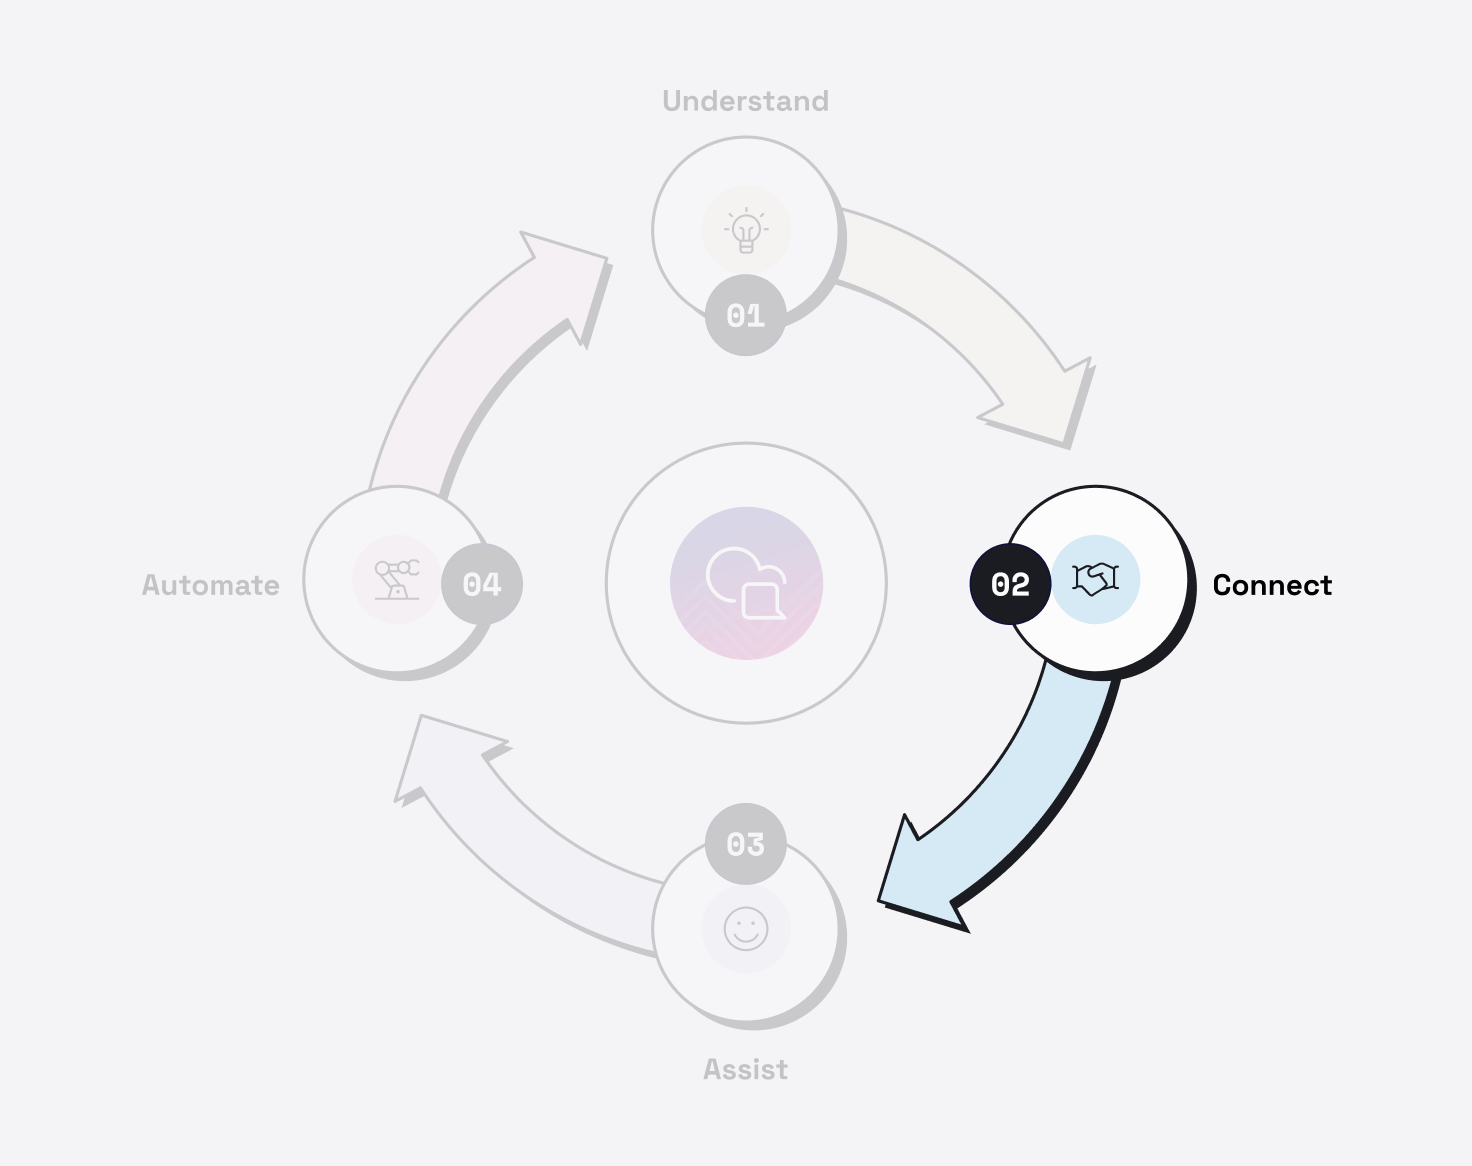 Connect phase of the Conversational Flywheel, the stage that expands customer engagement to multiple channels for a seamless connected customer experience